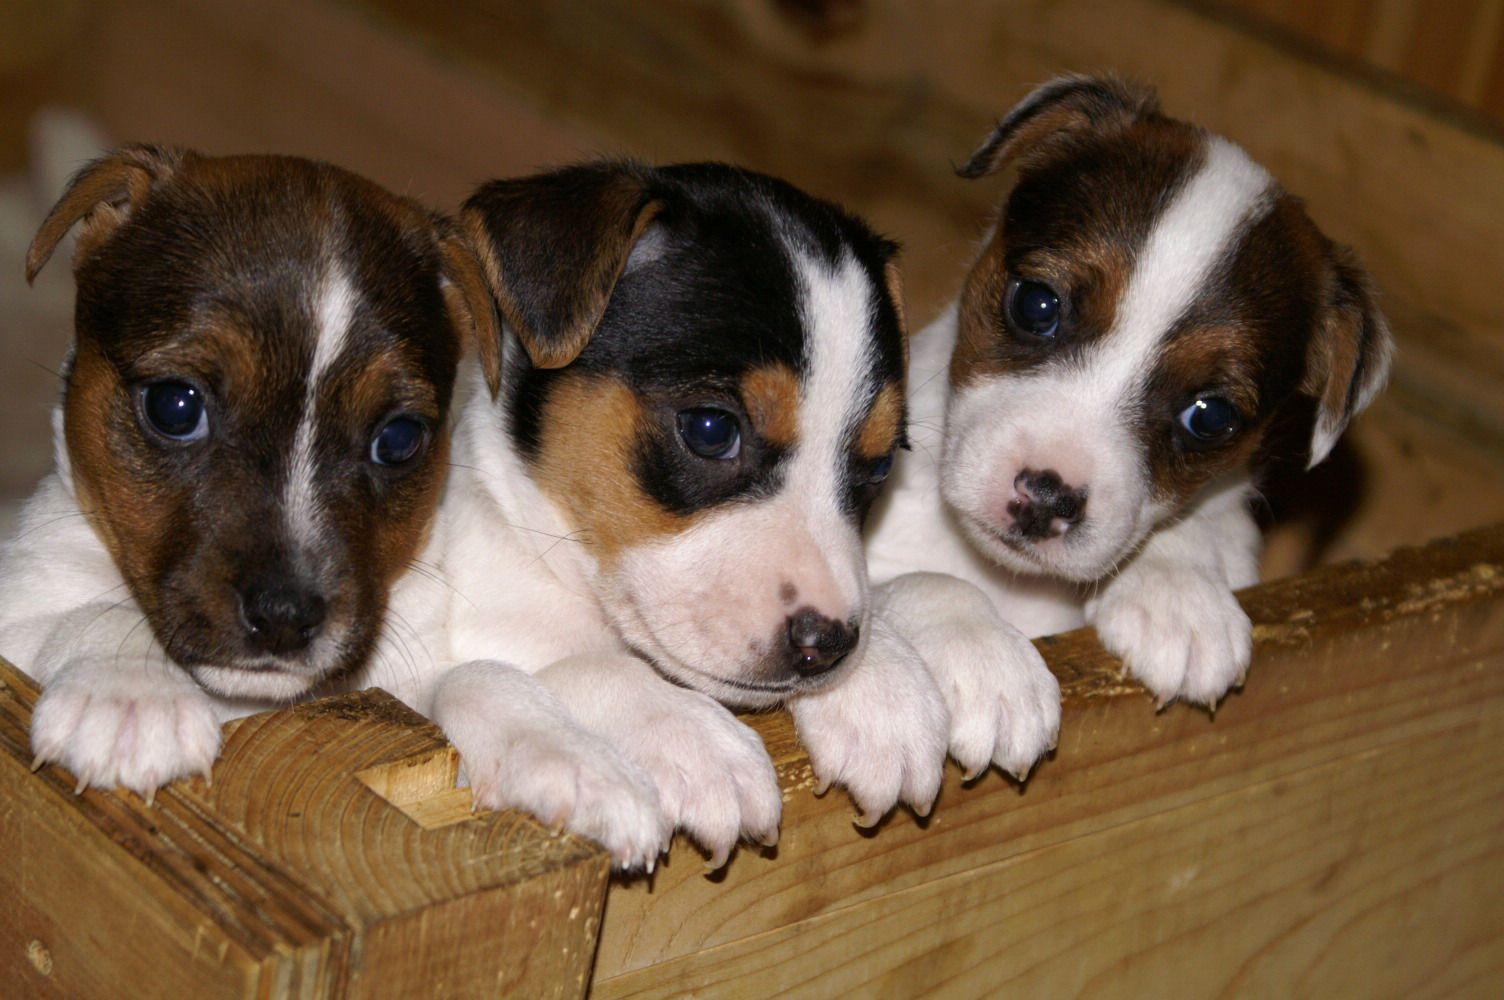 Jack Russell Terrier puppies photo and wallpaper. Beautiful Jack